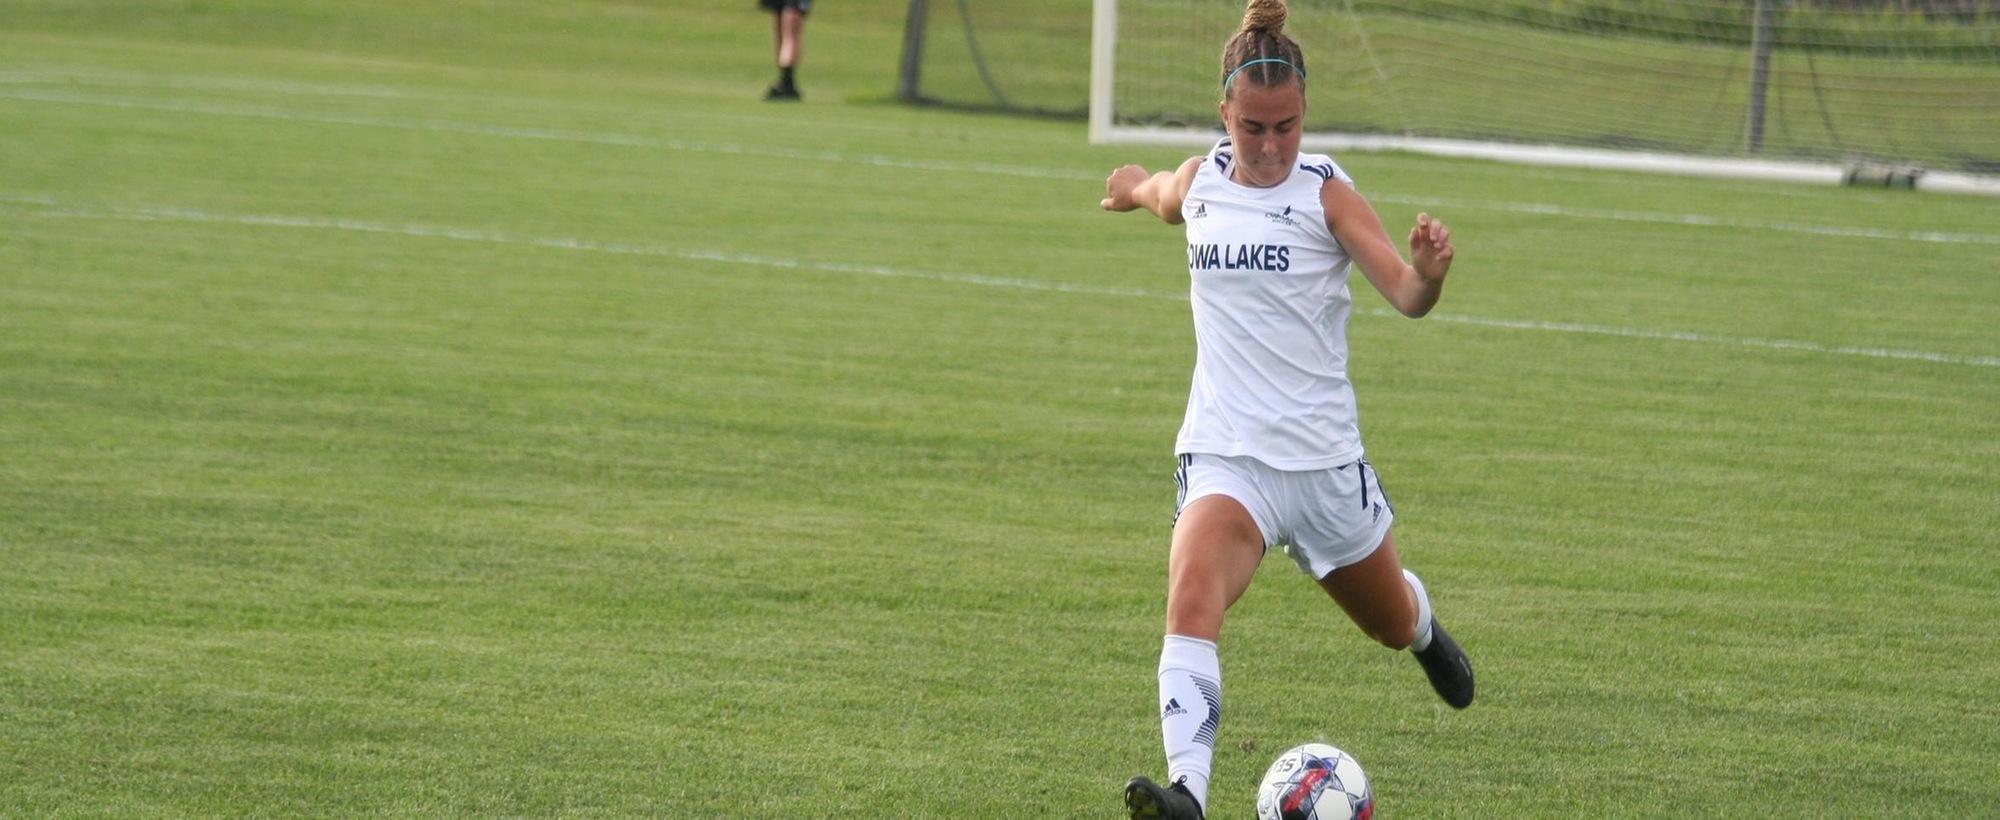 Lakers Stomp NIACC 9-0